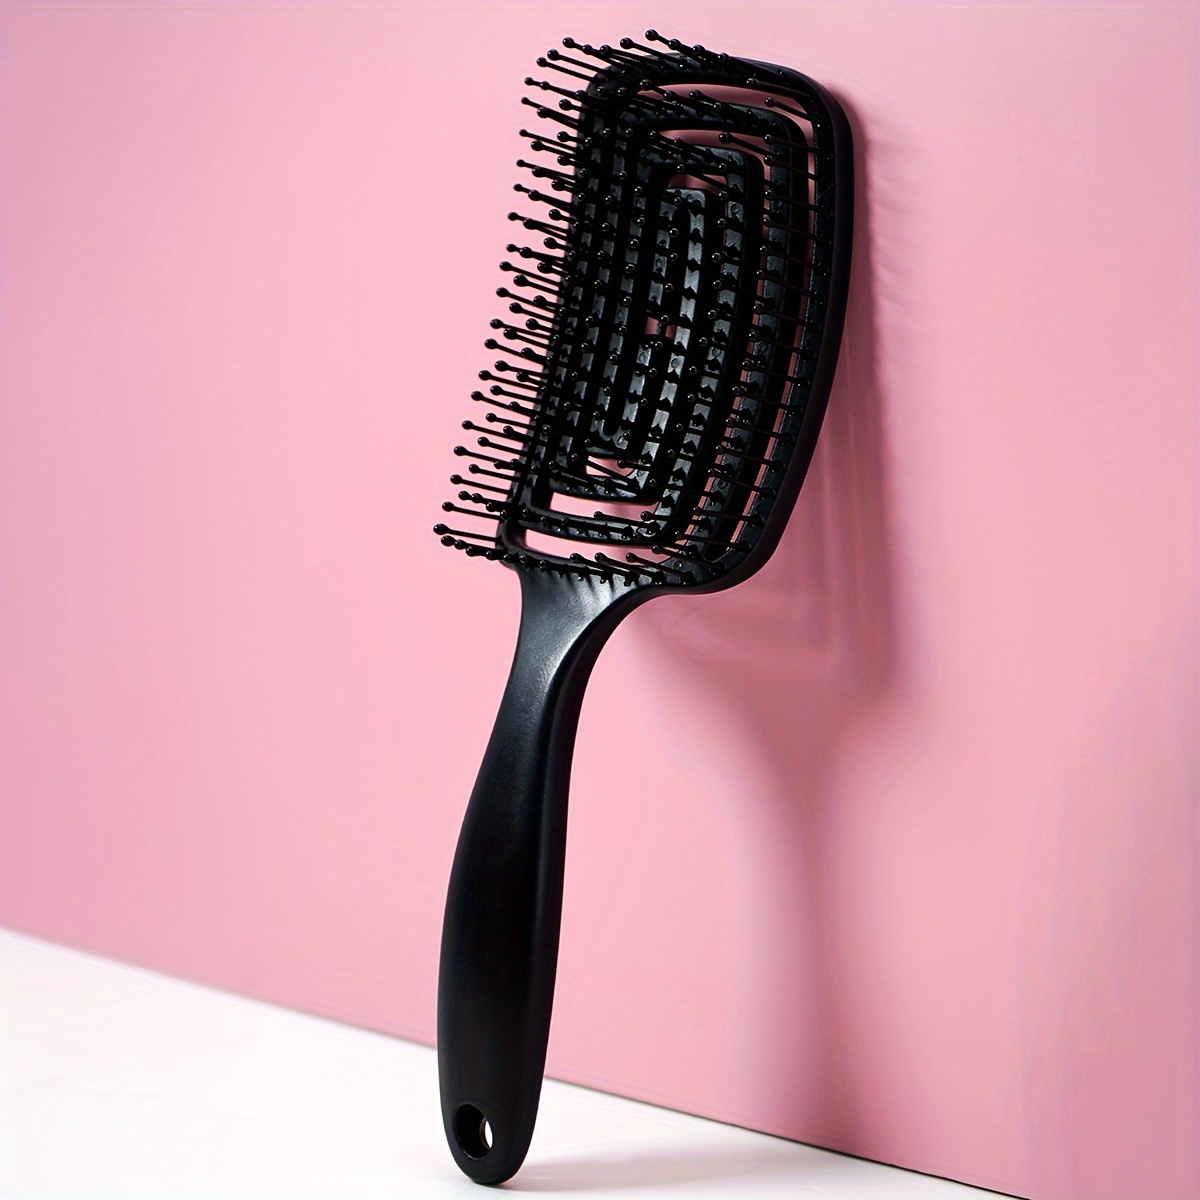 

1pc Detangling Hair Brush Comb For Normal Hair - Abs Plastic Handle, Plastic Bristles, Hollow Out Design For Scalp Massage, Anti-static Hairdressing Styling Tool